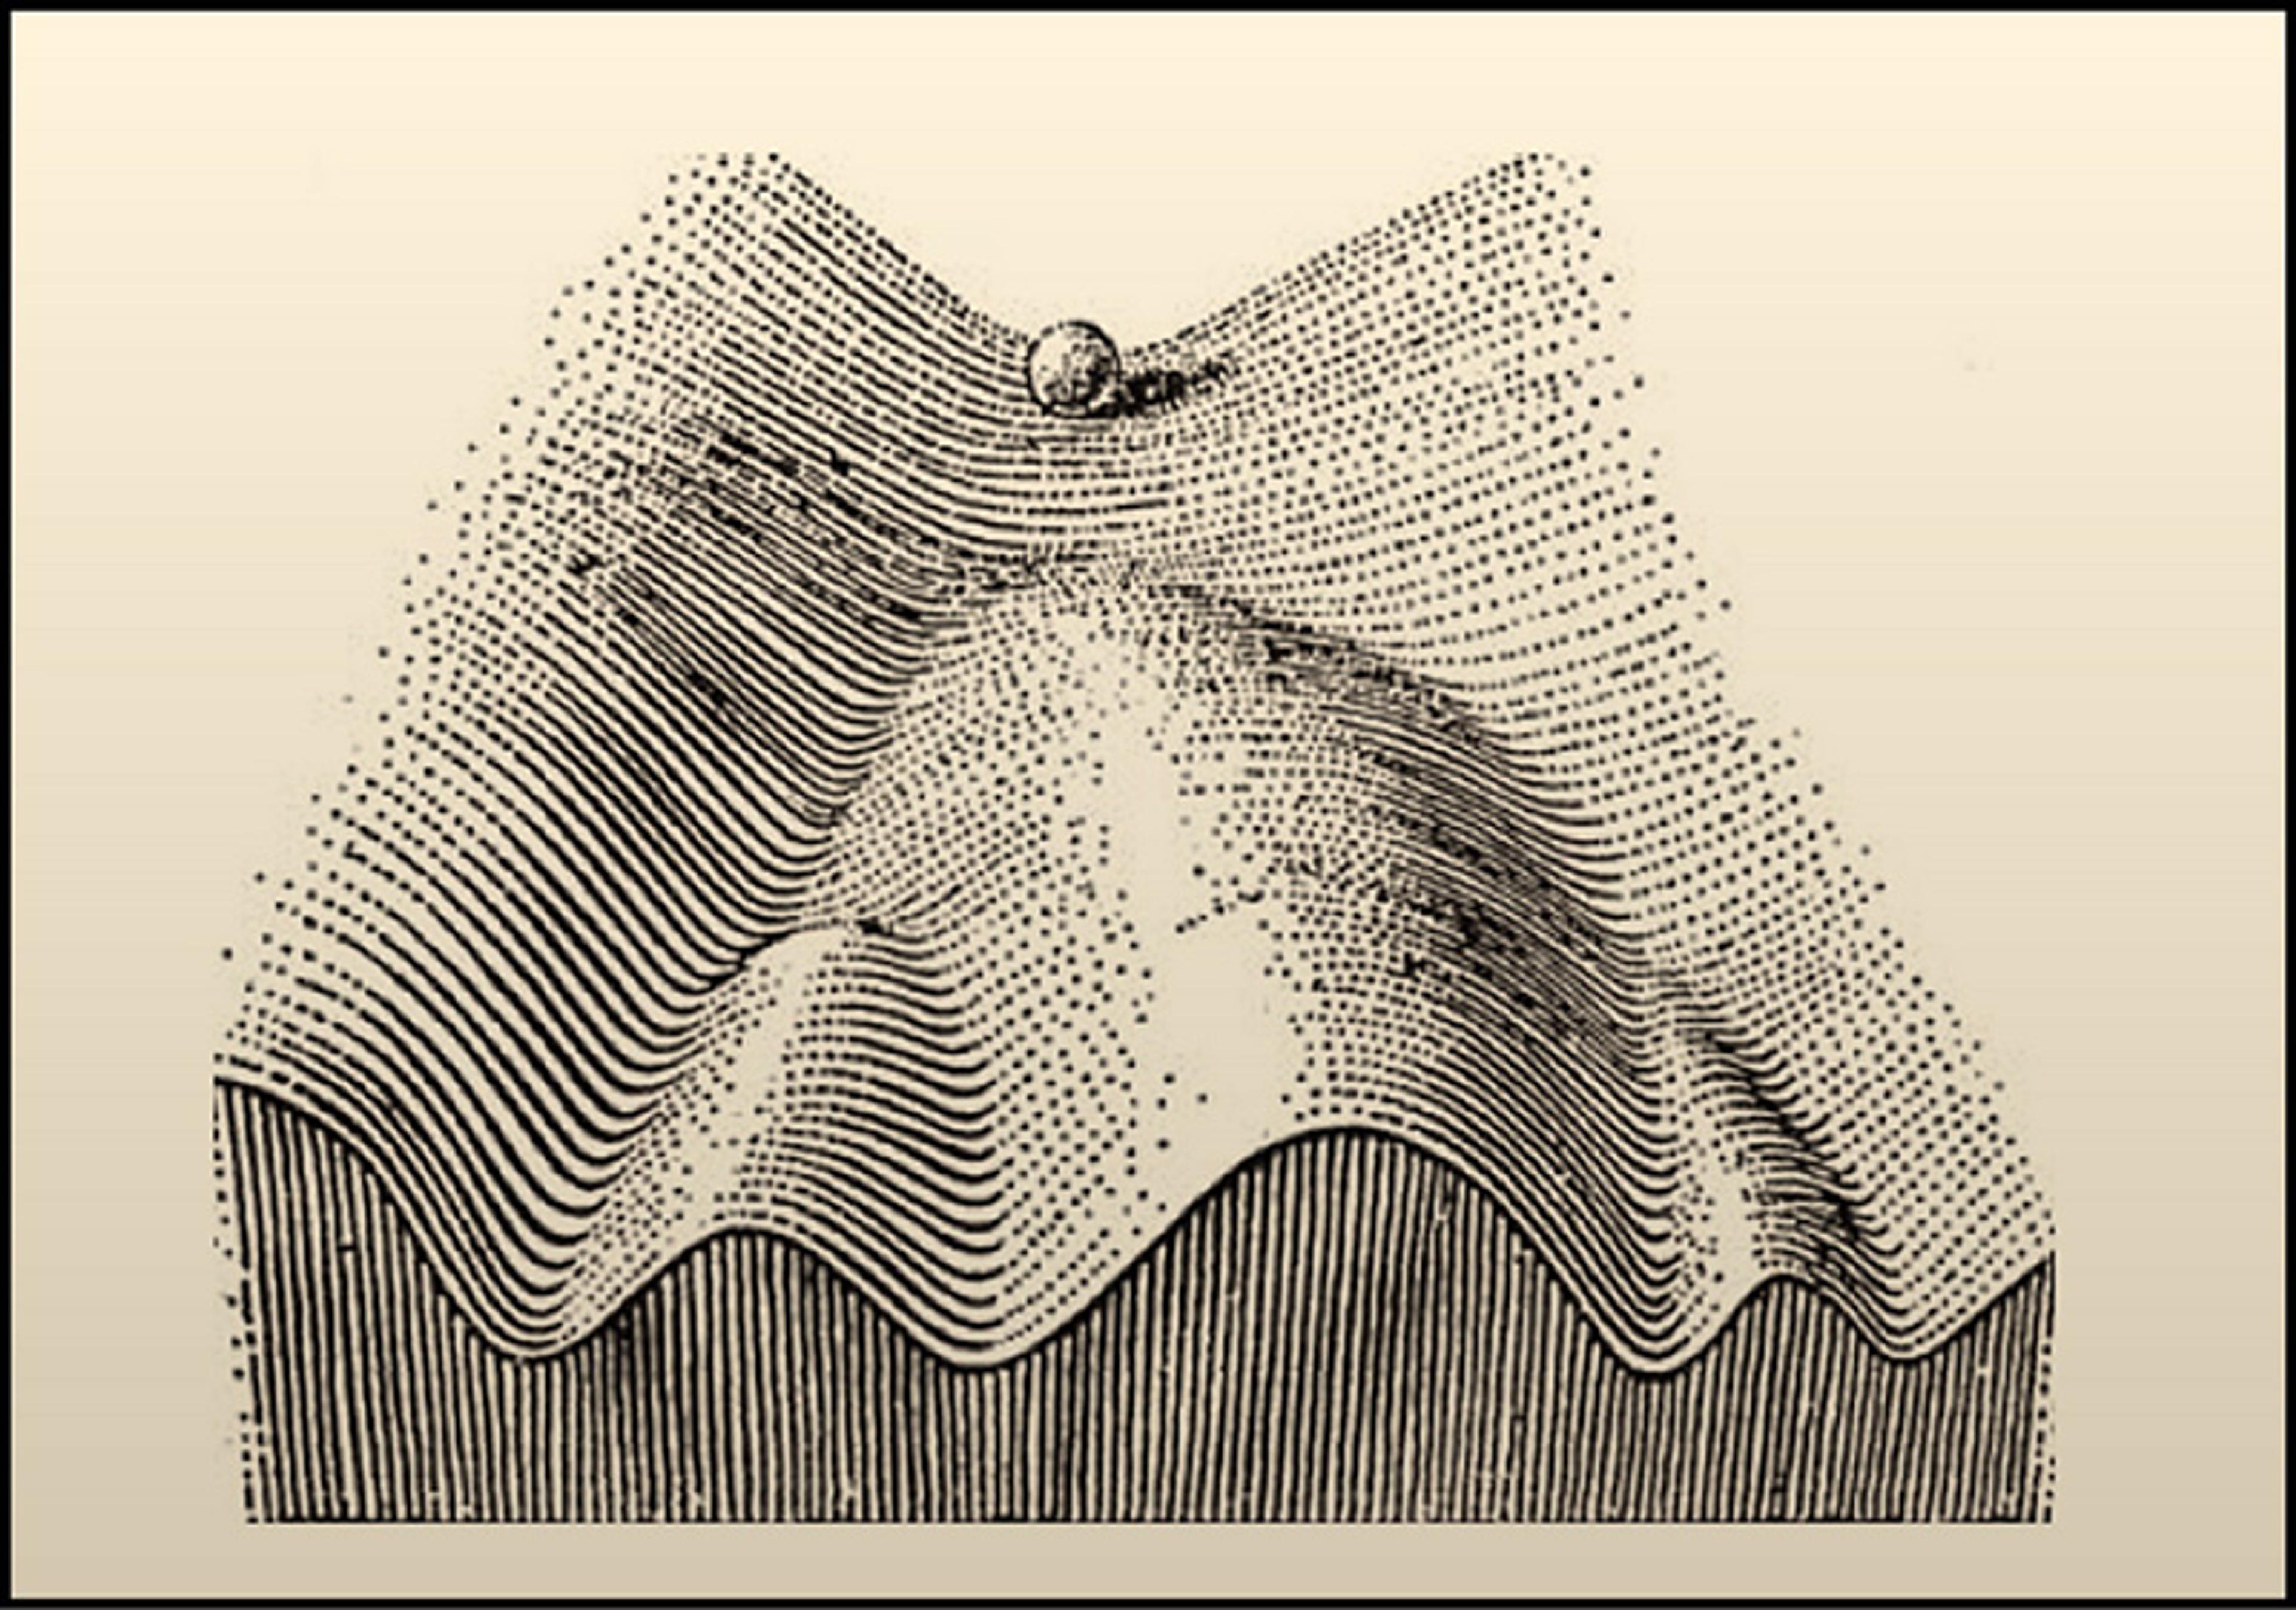 Black-and-white illustration of a ball sitting on a hilly, wave-like landscape made of contour lines. The image highlights the topography and elevation changes of the terrain, emphasising the contours with detailed line work and shading.